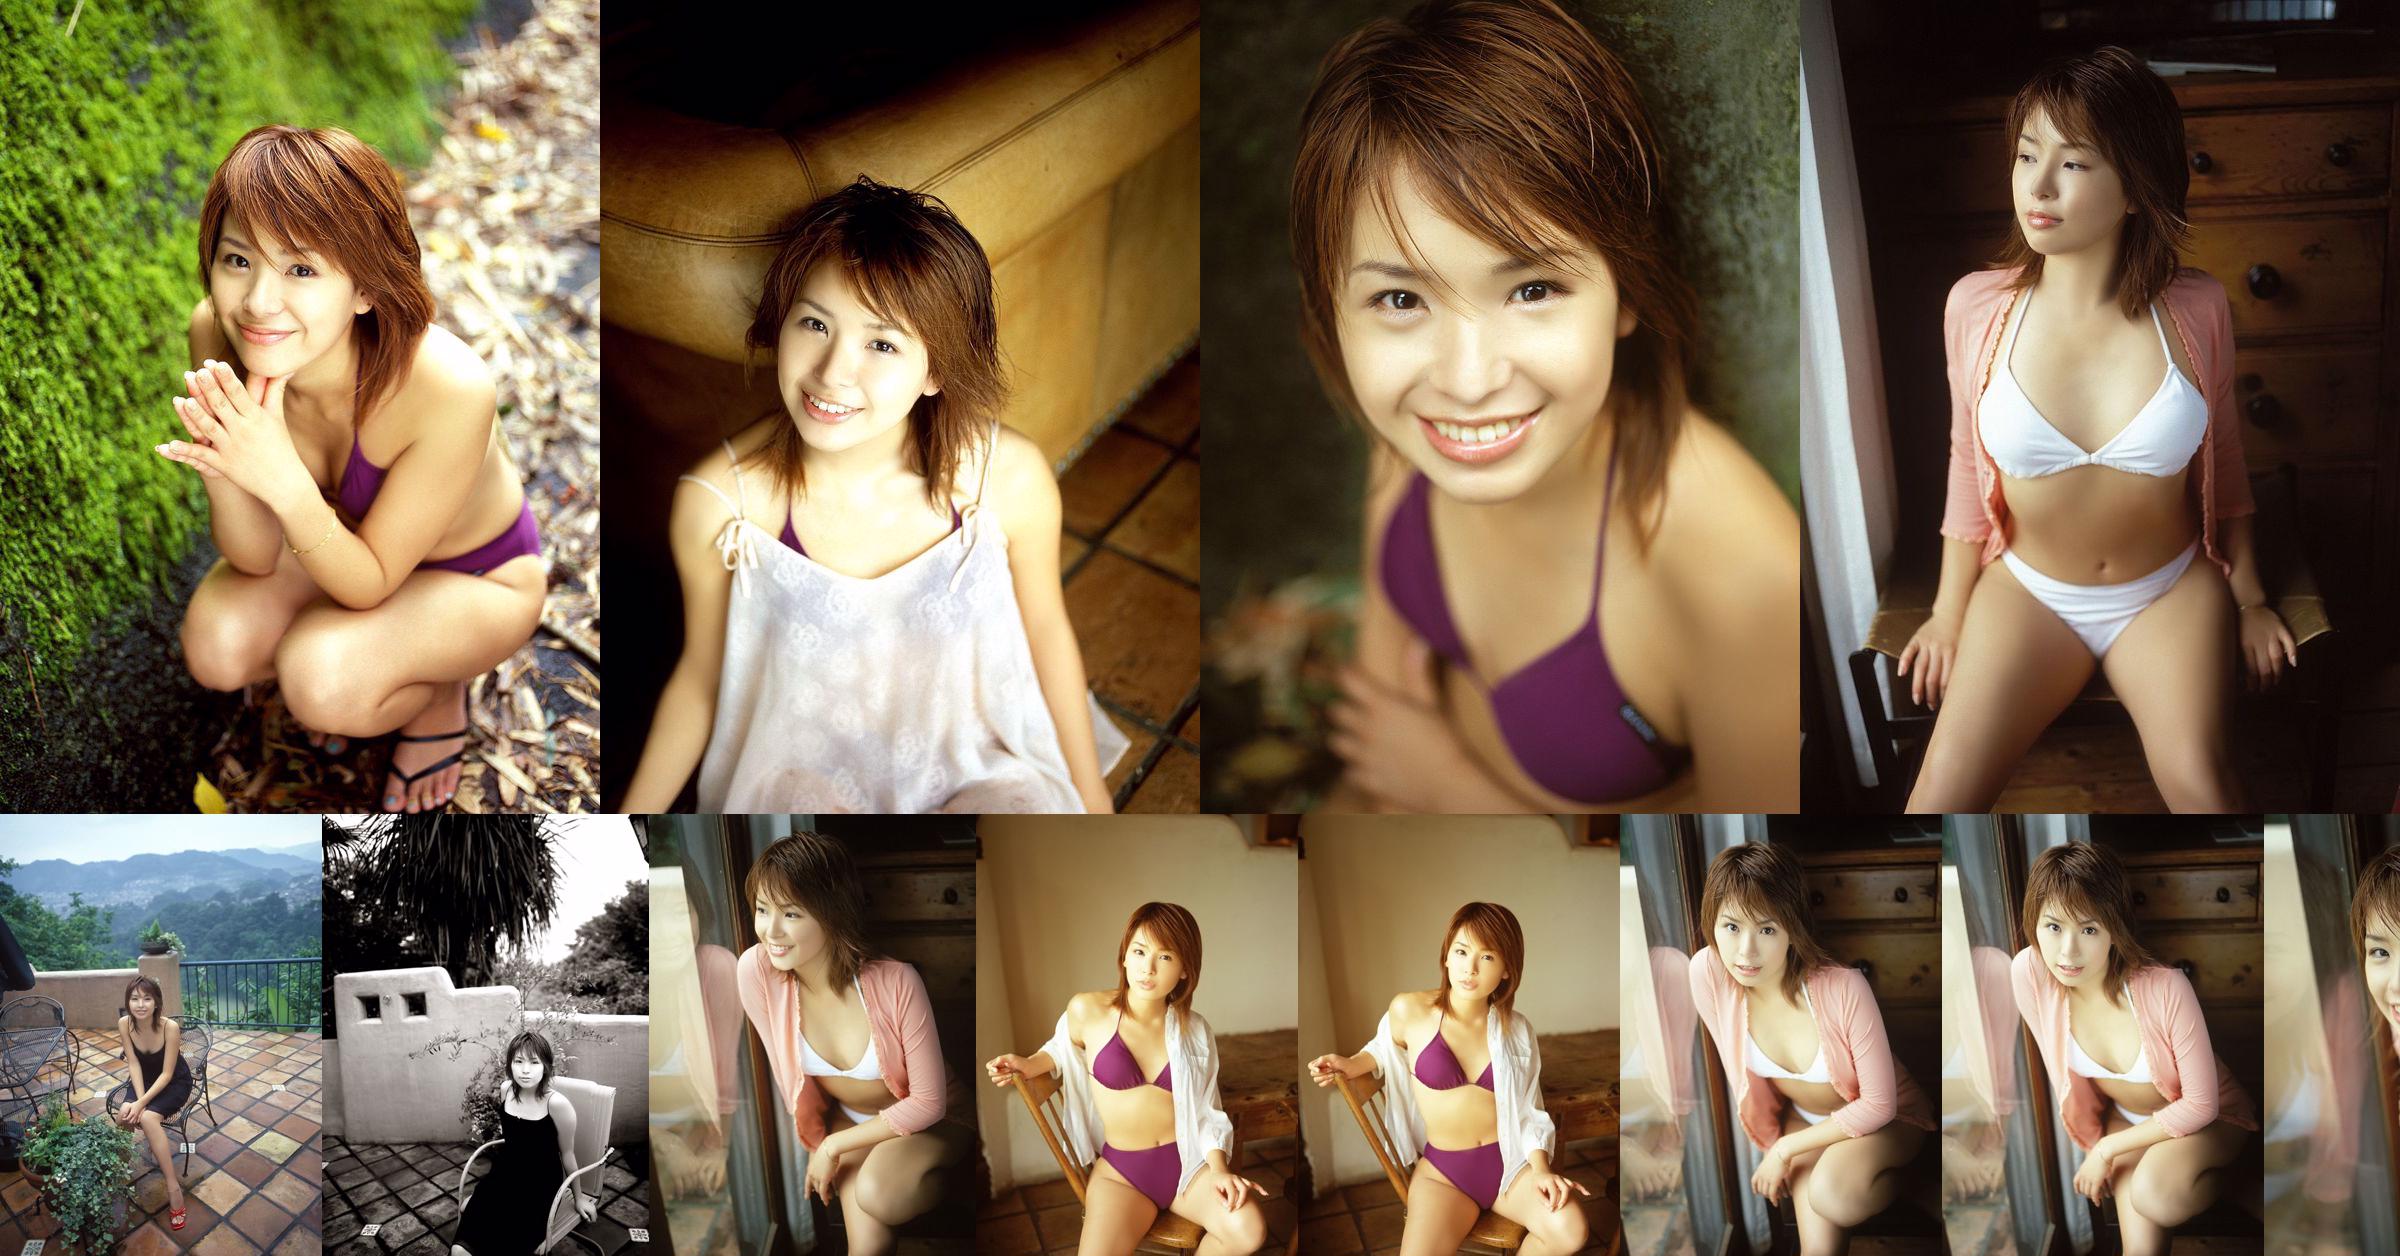 [NS Eyes] SF-No.207 Ami Ishii Ami Ishii / Ami Ishii No.888f78 Page 1